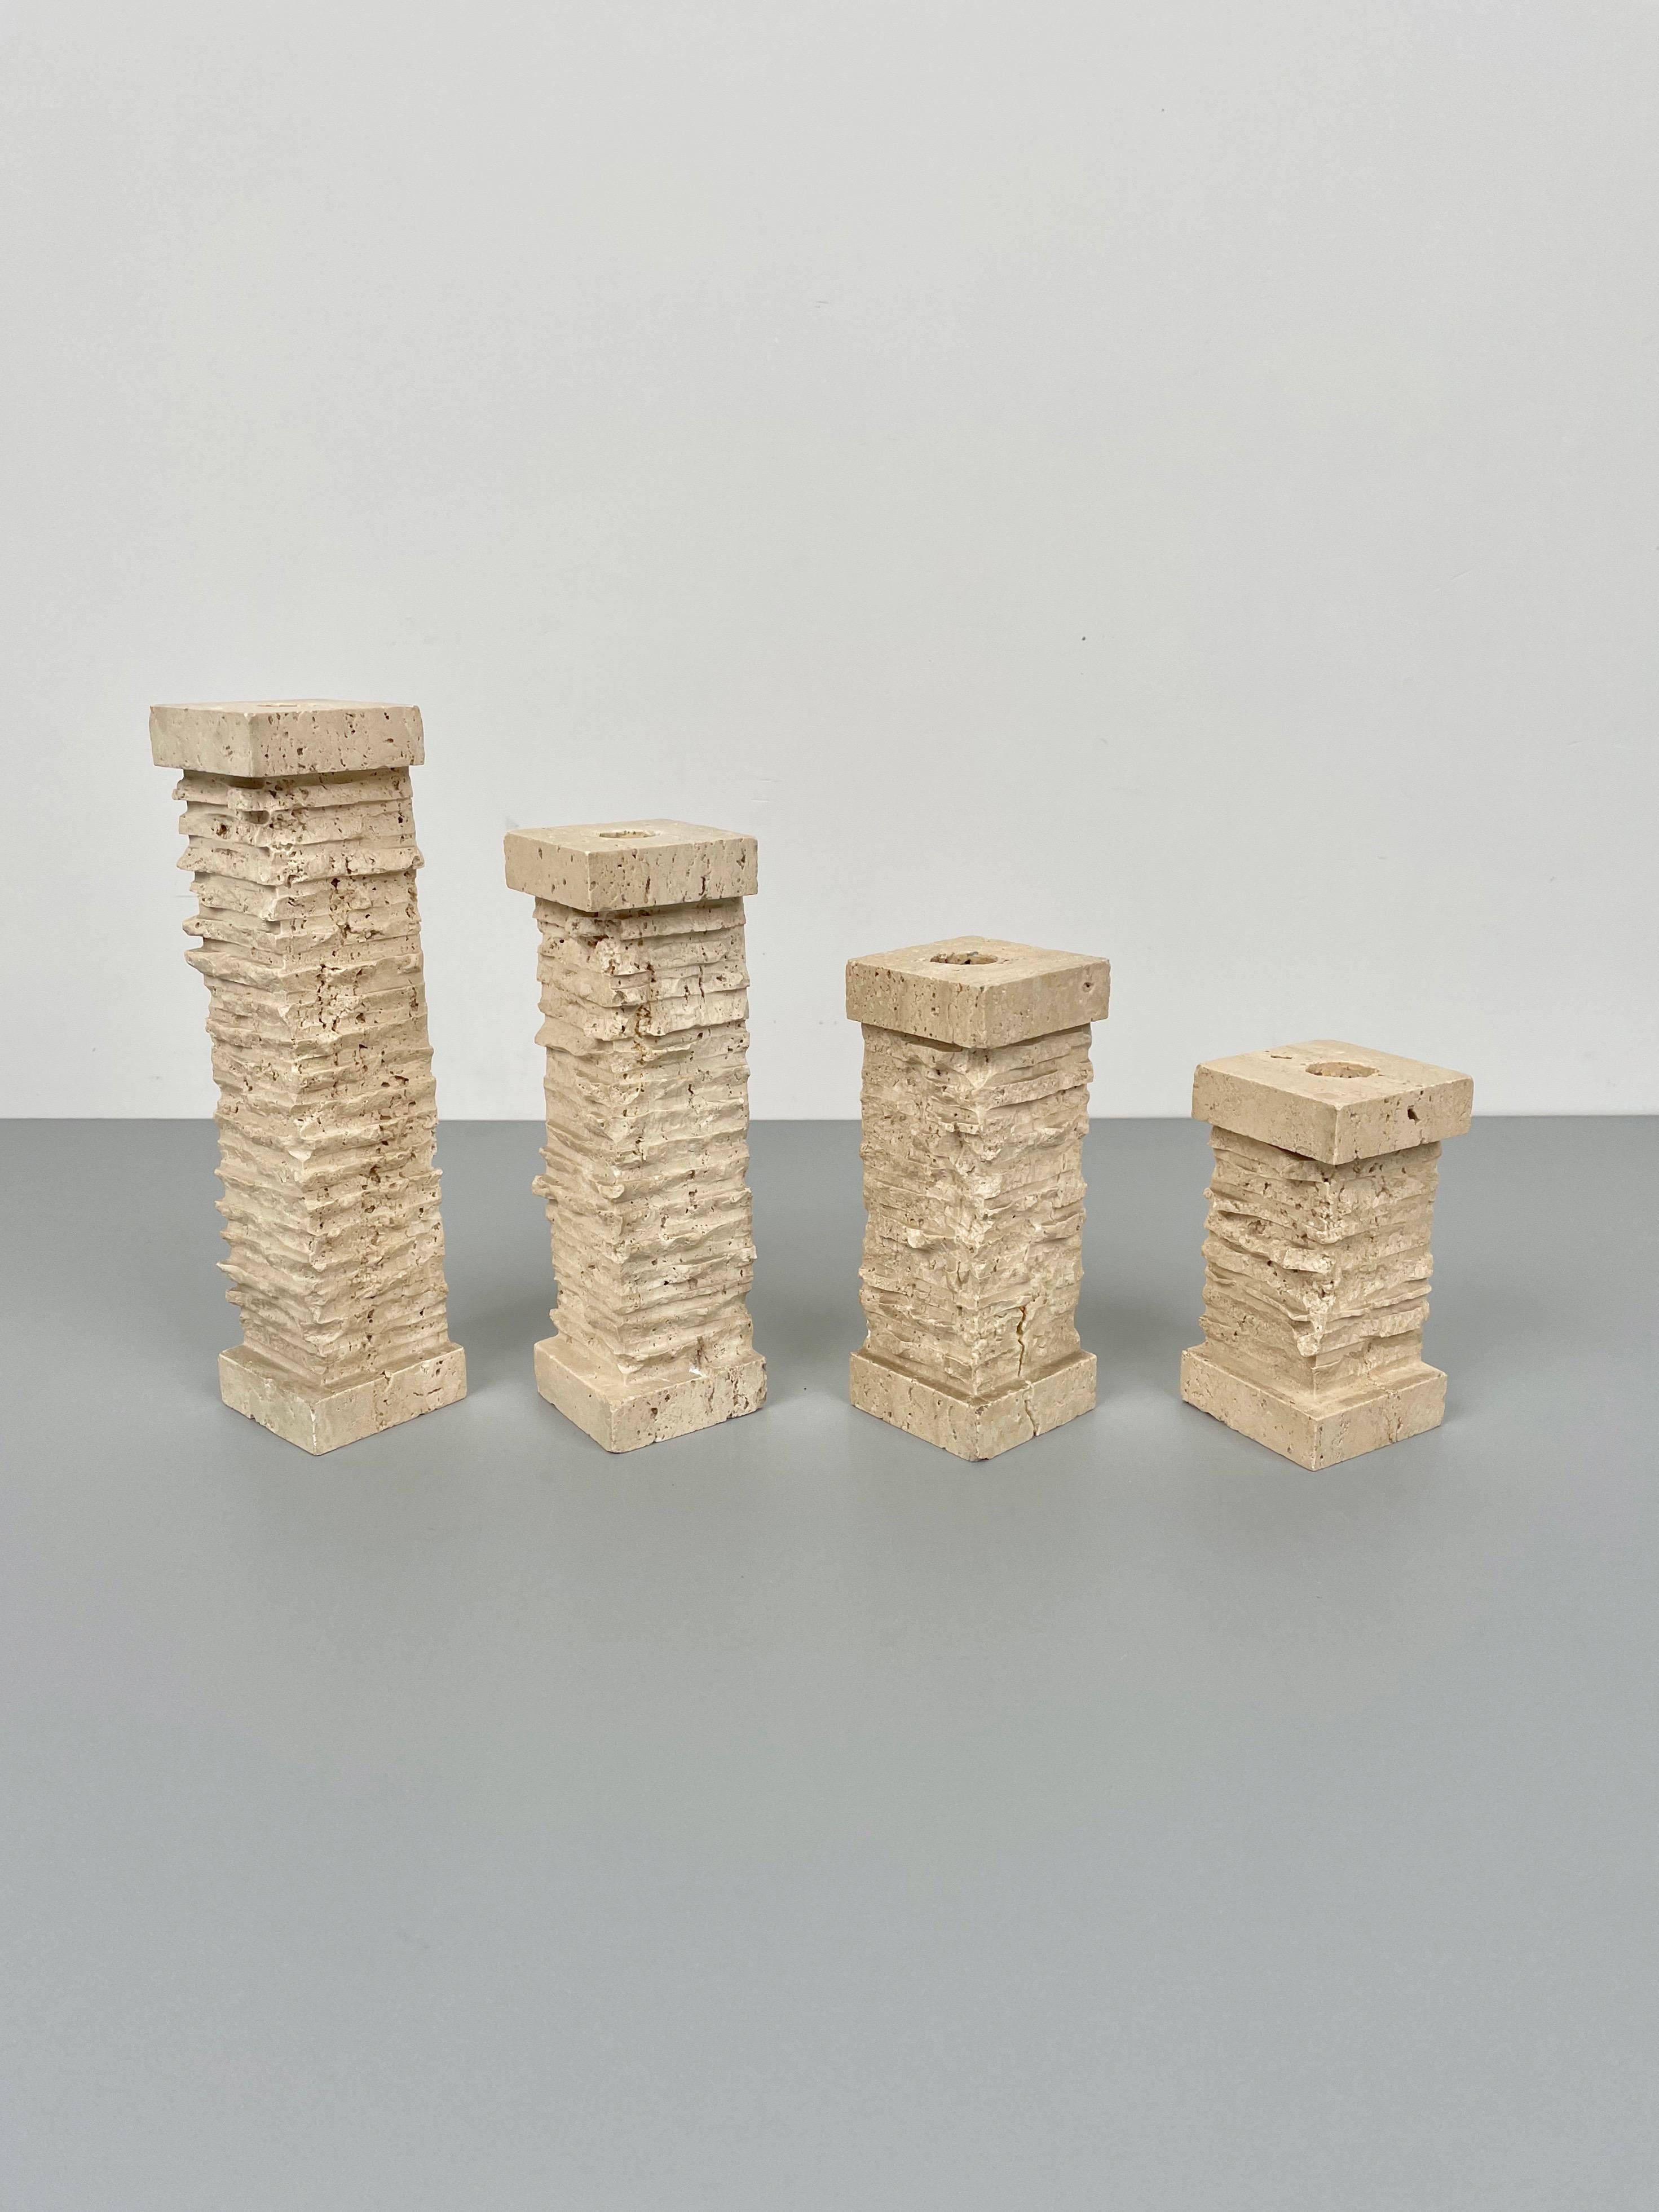 Set of four candle holders in travertine marble in the shape of ancient walls made in Italy in the 1970s.

The four pieces lay on squared bases of 6 x 6 cm but come in decreasing heights, in order: 24 cm, 20, cm, 16 cm, 12 cm.